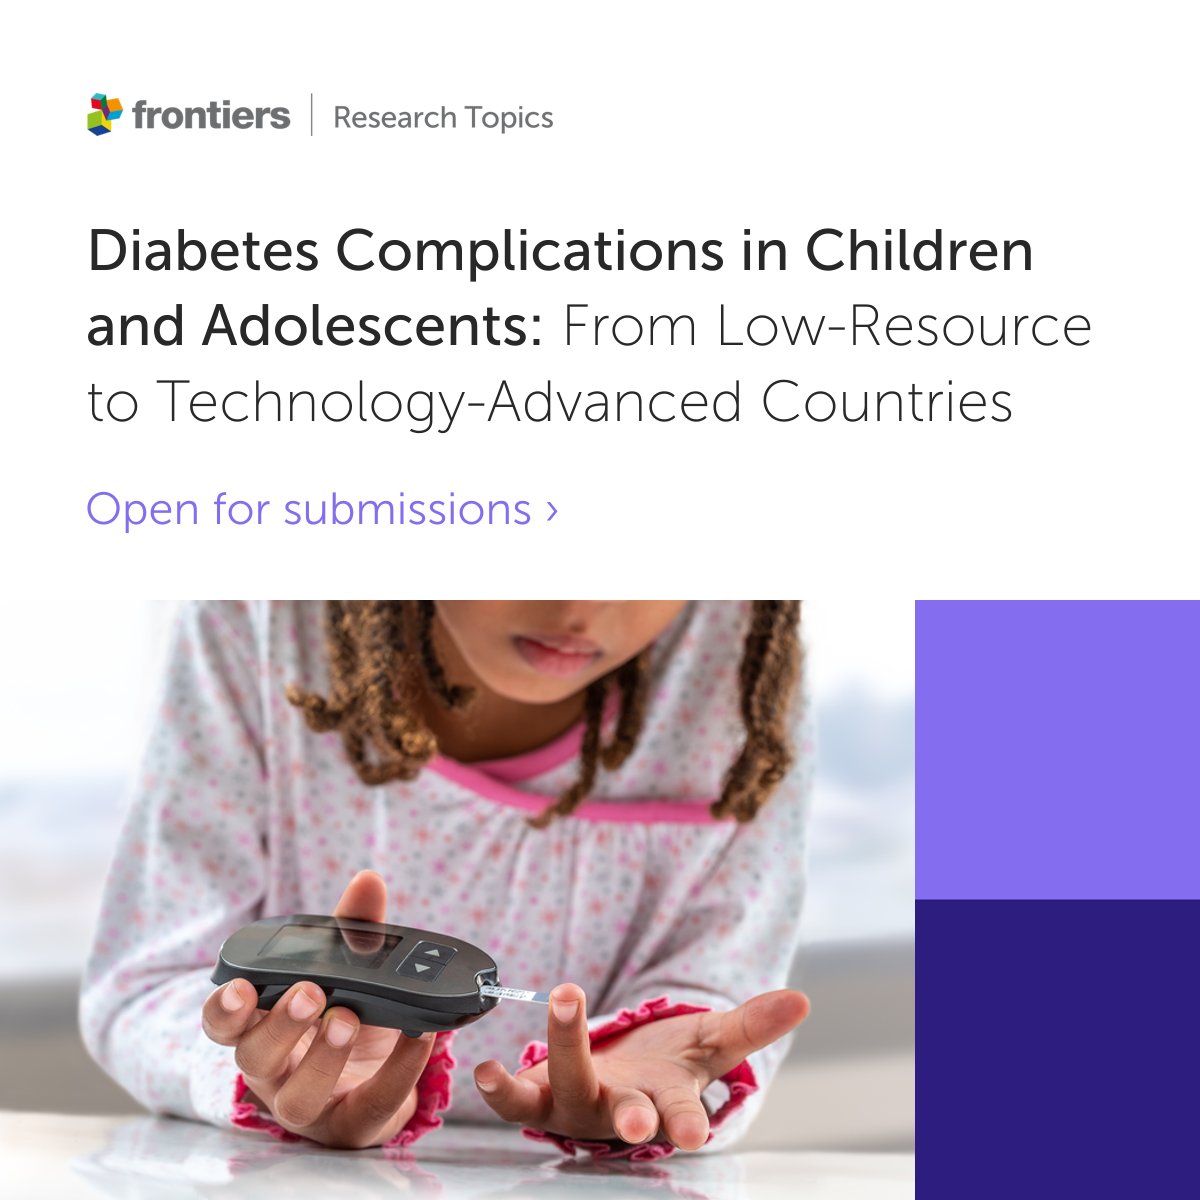 📢Call for papers! 'Diabetes Complications in Children and Adolescents: From Low-Resource to Technology-Advanced Countries' Edited by Marco Marigliano, Giulio Frontino, Enza Mozzillo, and Roberto Franceschi Submit your article or find out more ➡️ fro.ntiers.in/Wk76